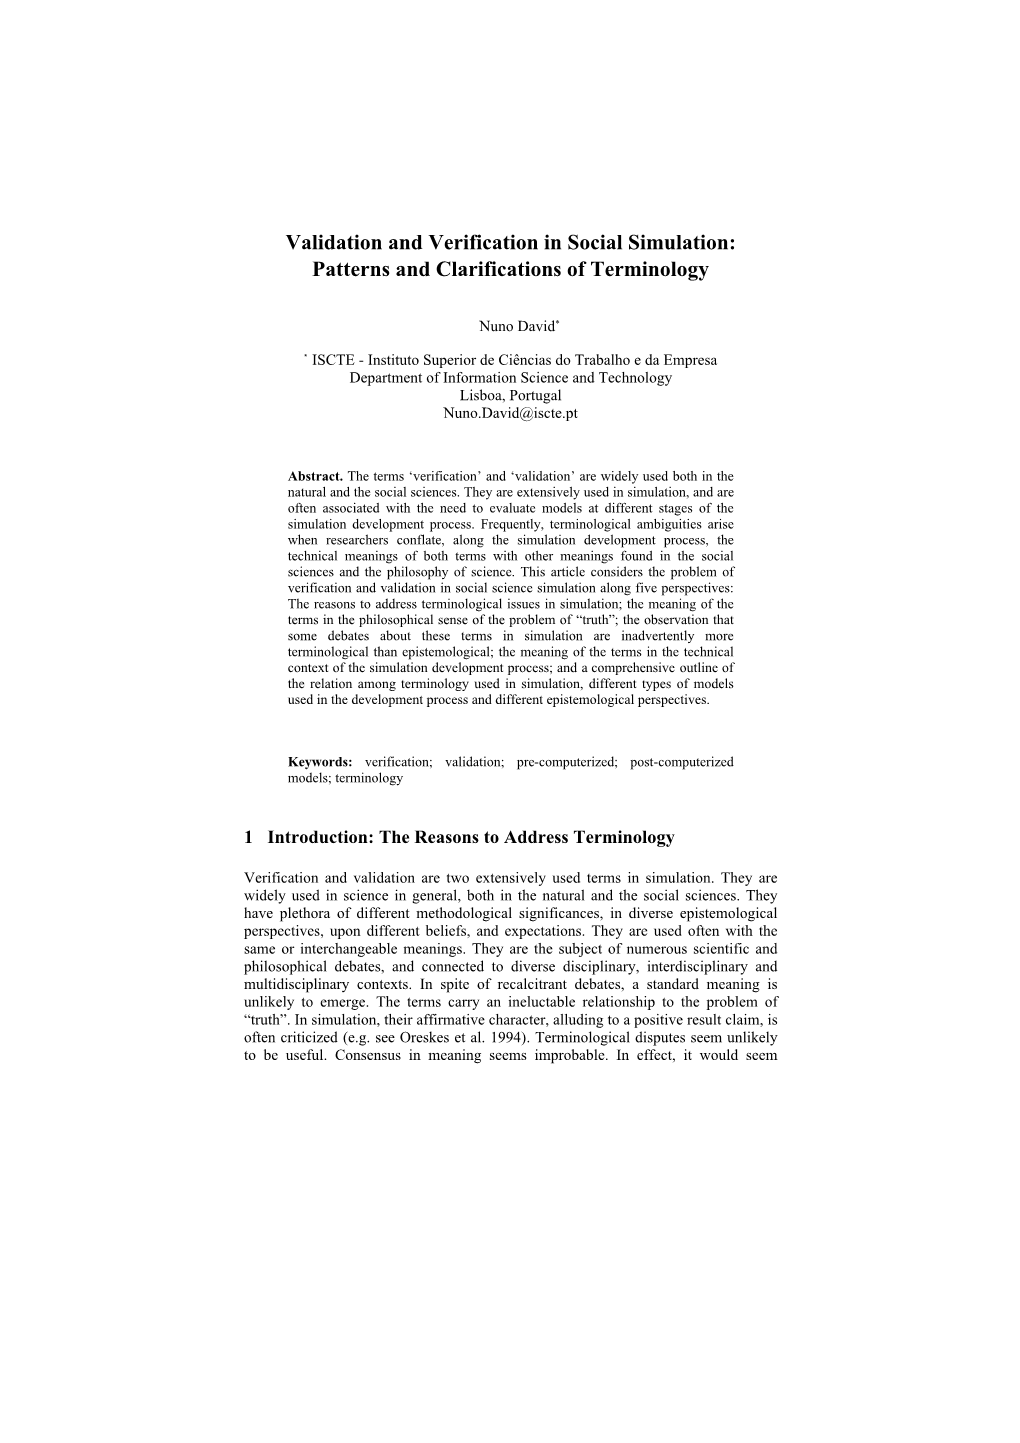 Validation and Verification in Social Simulation: Patterns and Clarifications of Terminology